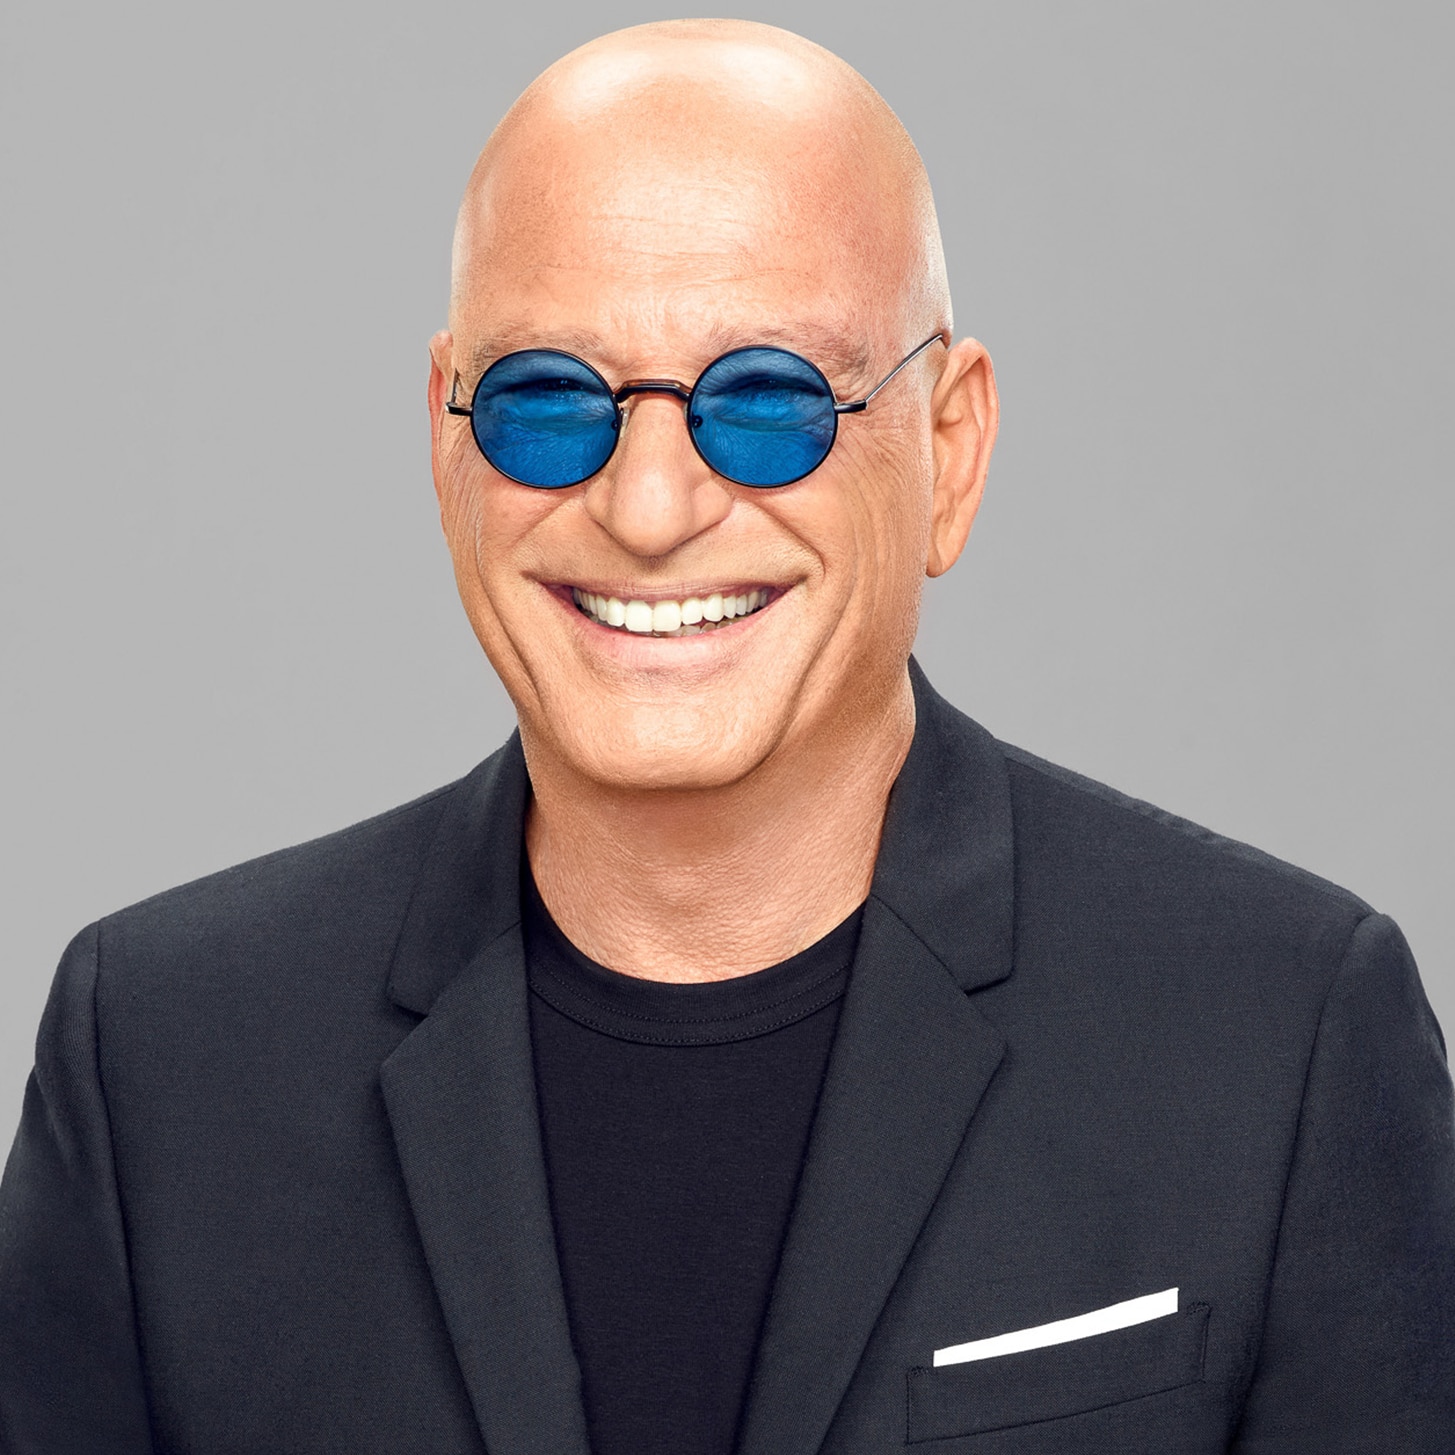 Howie Mandel alive and kicking